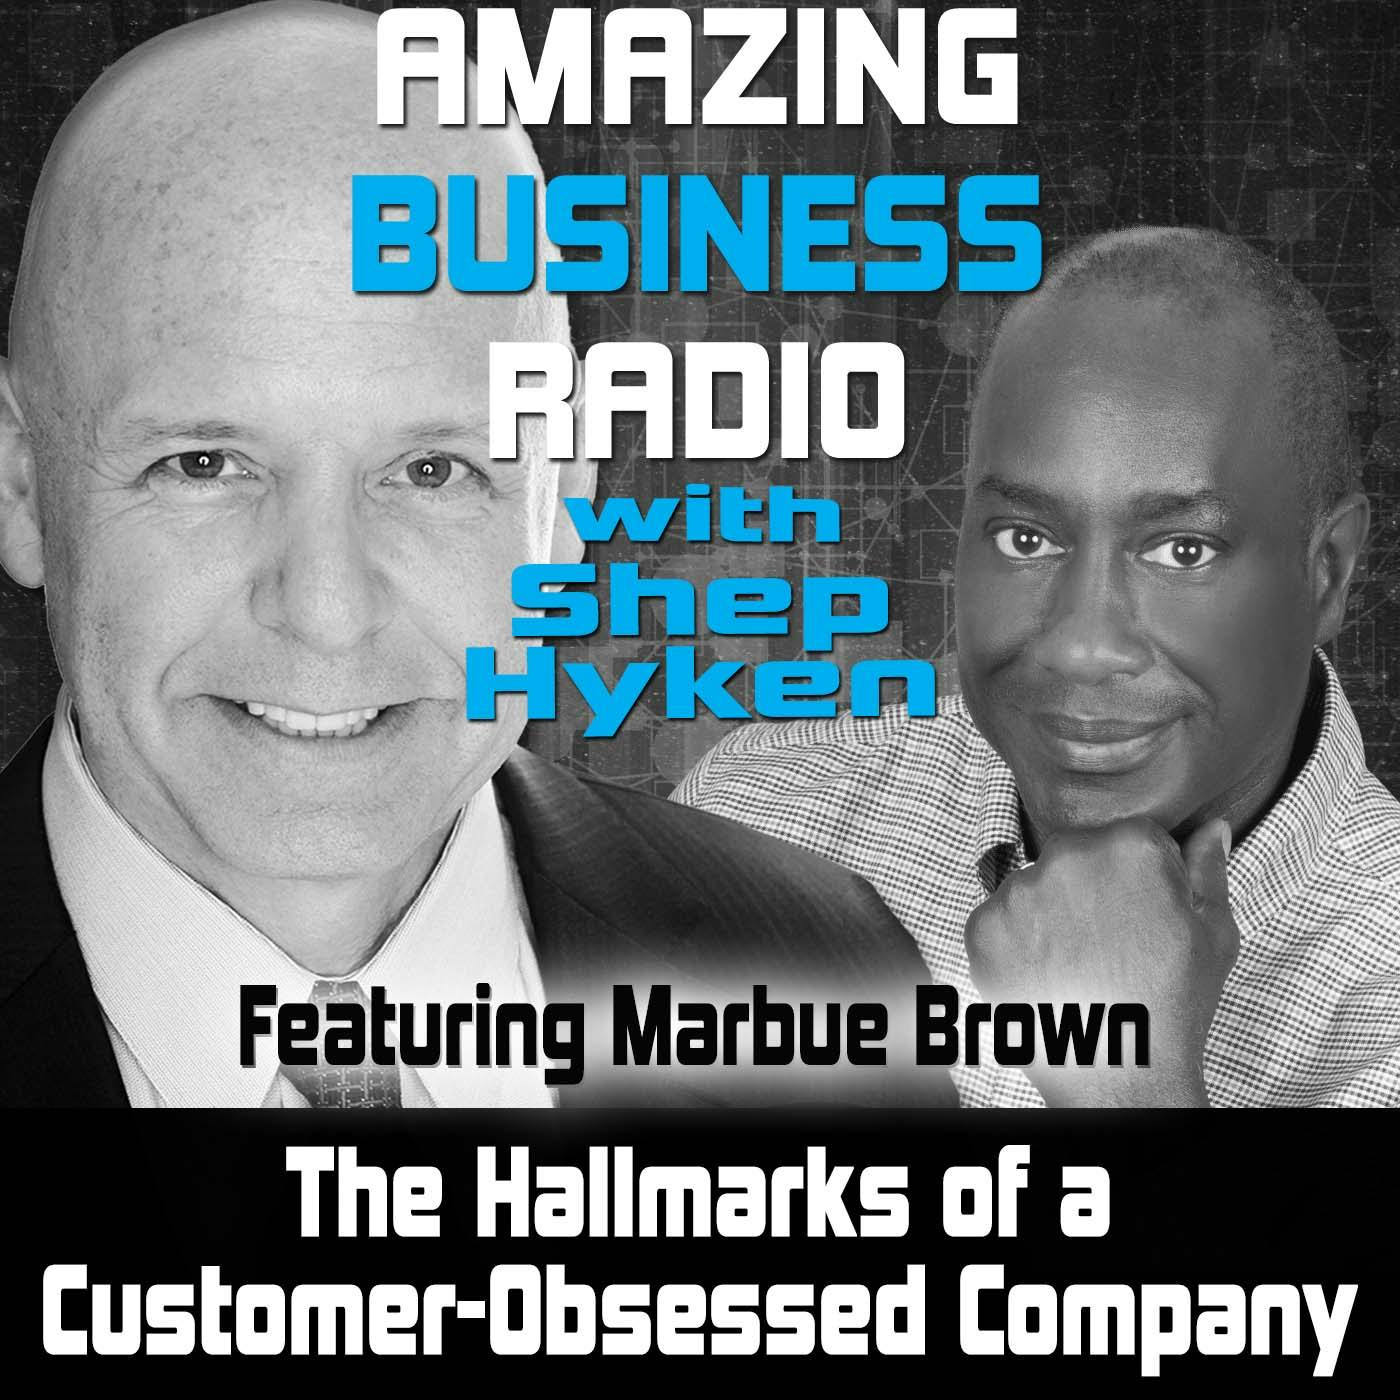 The Hallmarks of a Customer-Obsessed Company Featuring Marbue Brown